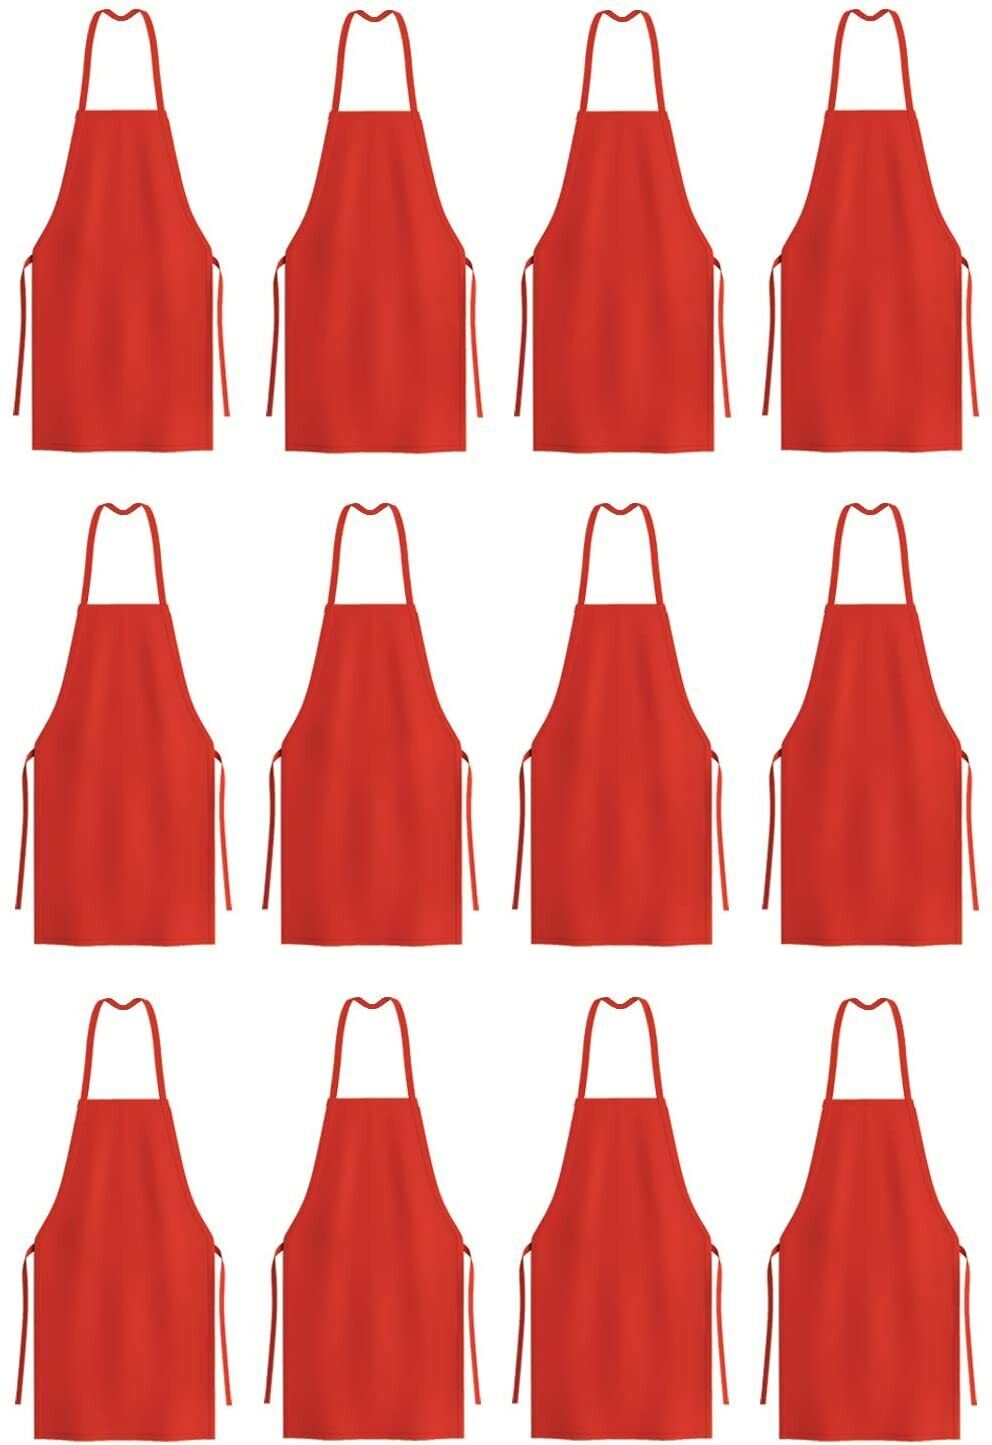 12 Pack of Kitchen Aprons - Full Bib Size Polyester Apron - Black Red or White Arkwright Does Not Apply - фотография #4